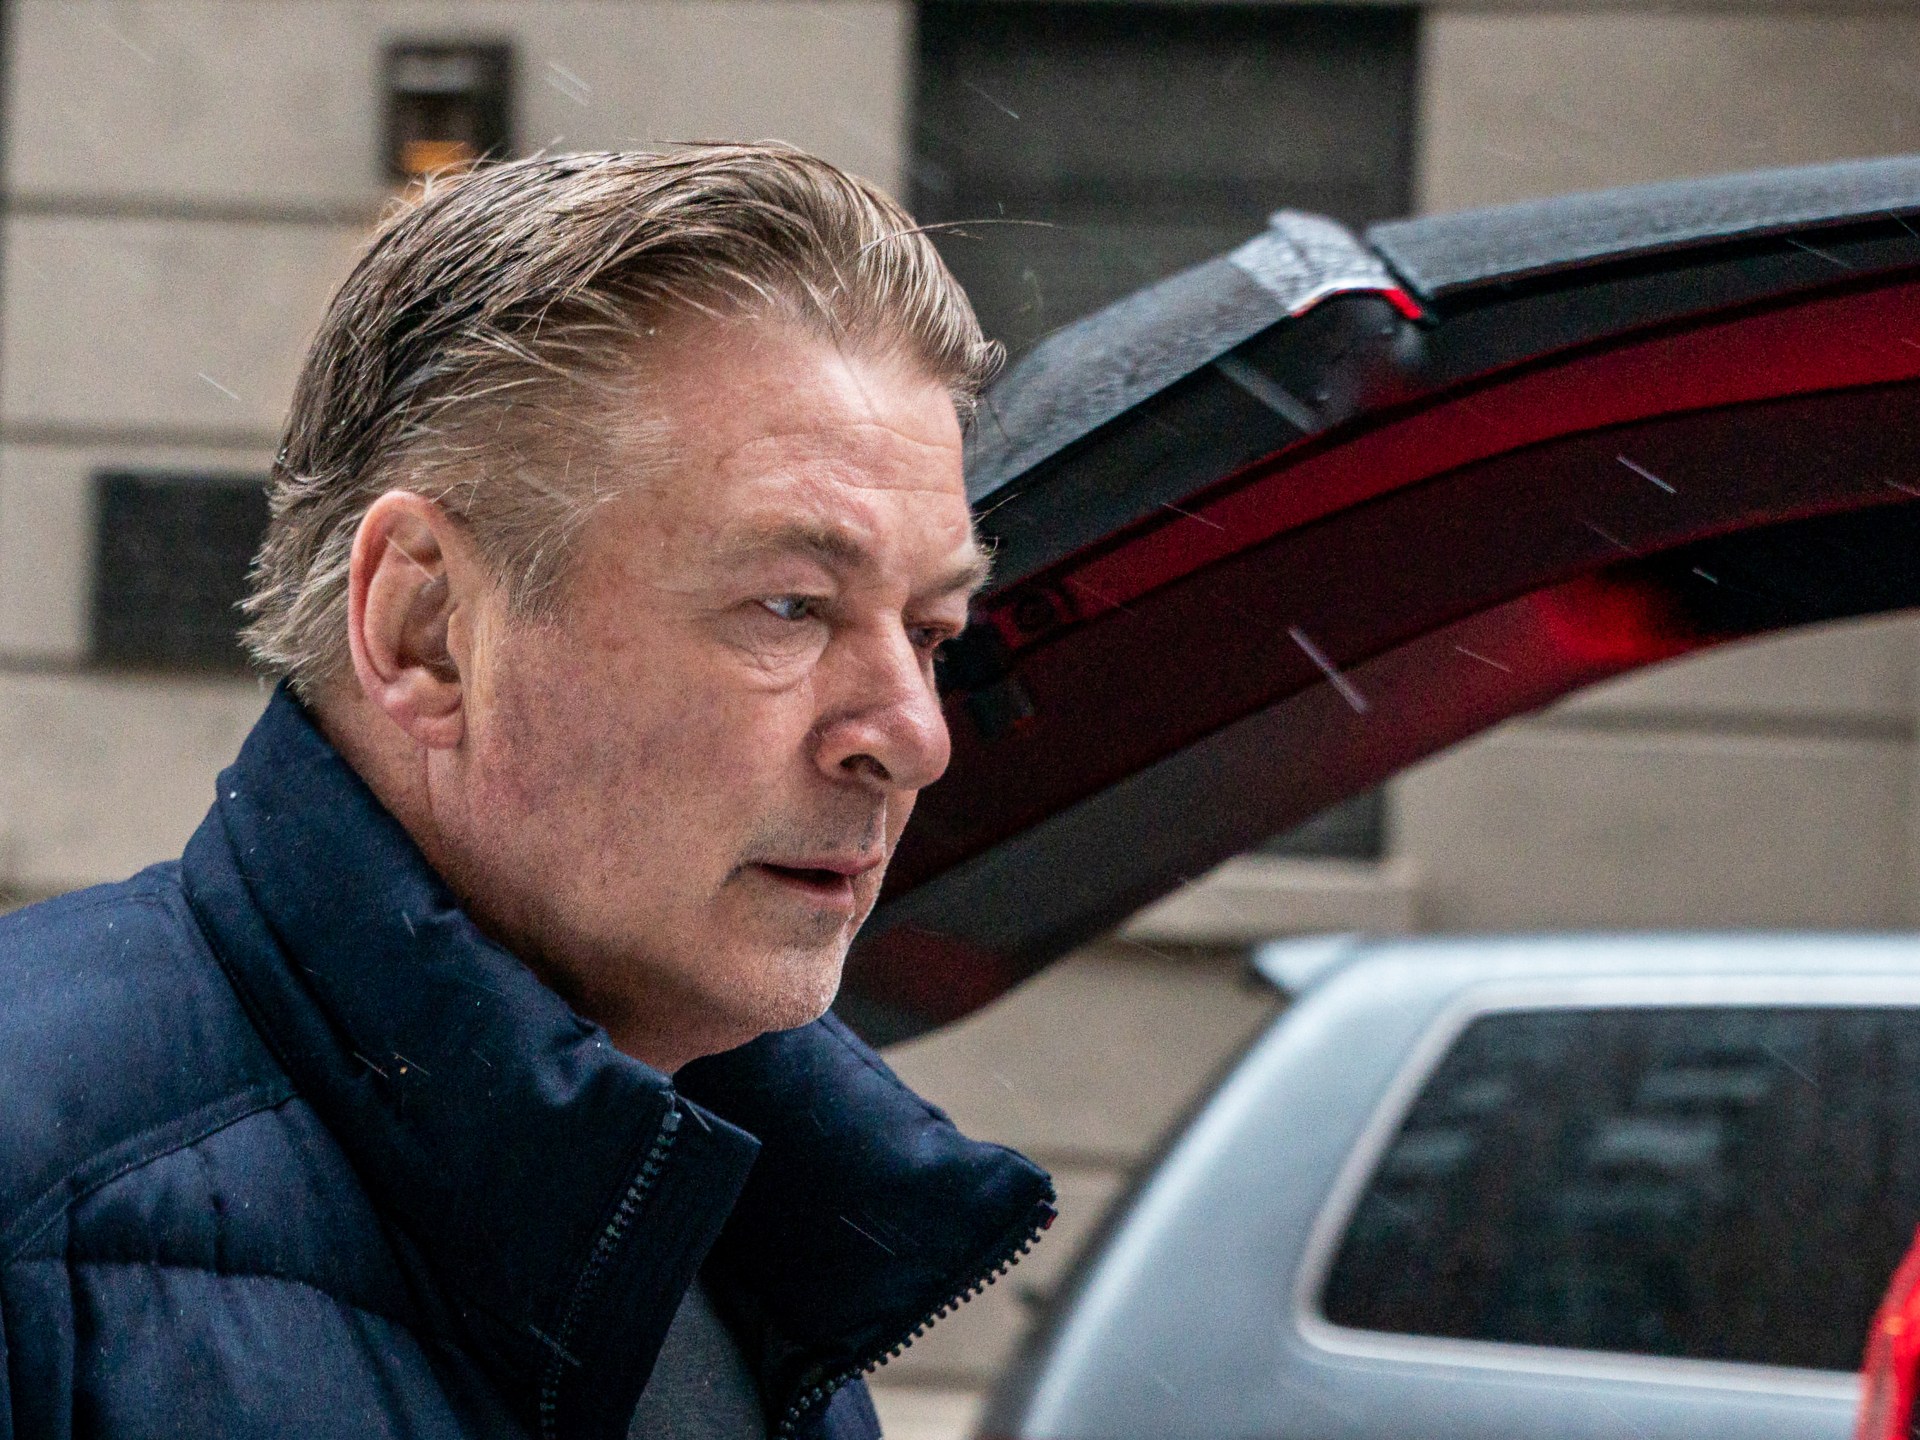 Charges filed against actor Alec Baldwin in shooting death on set